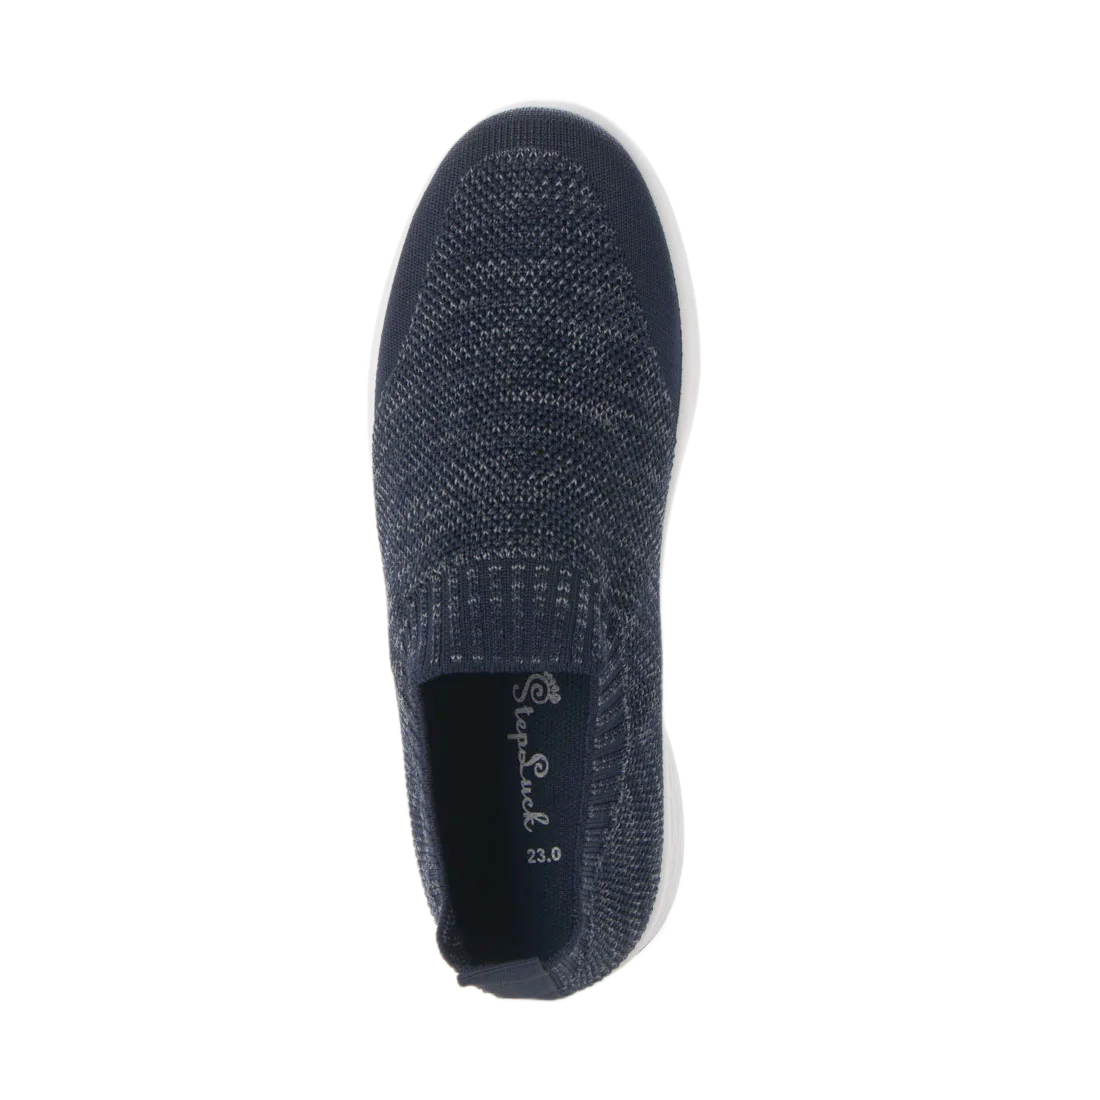  fly knitted sneakers slip-on shoes sneakers new goods [22535-NAV-245]24.5cm walk interior put on footwear 